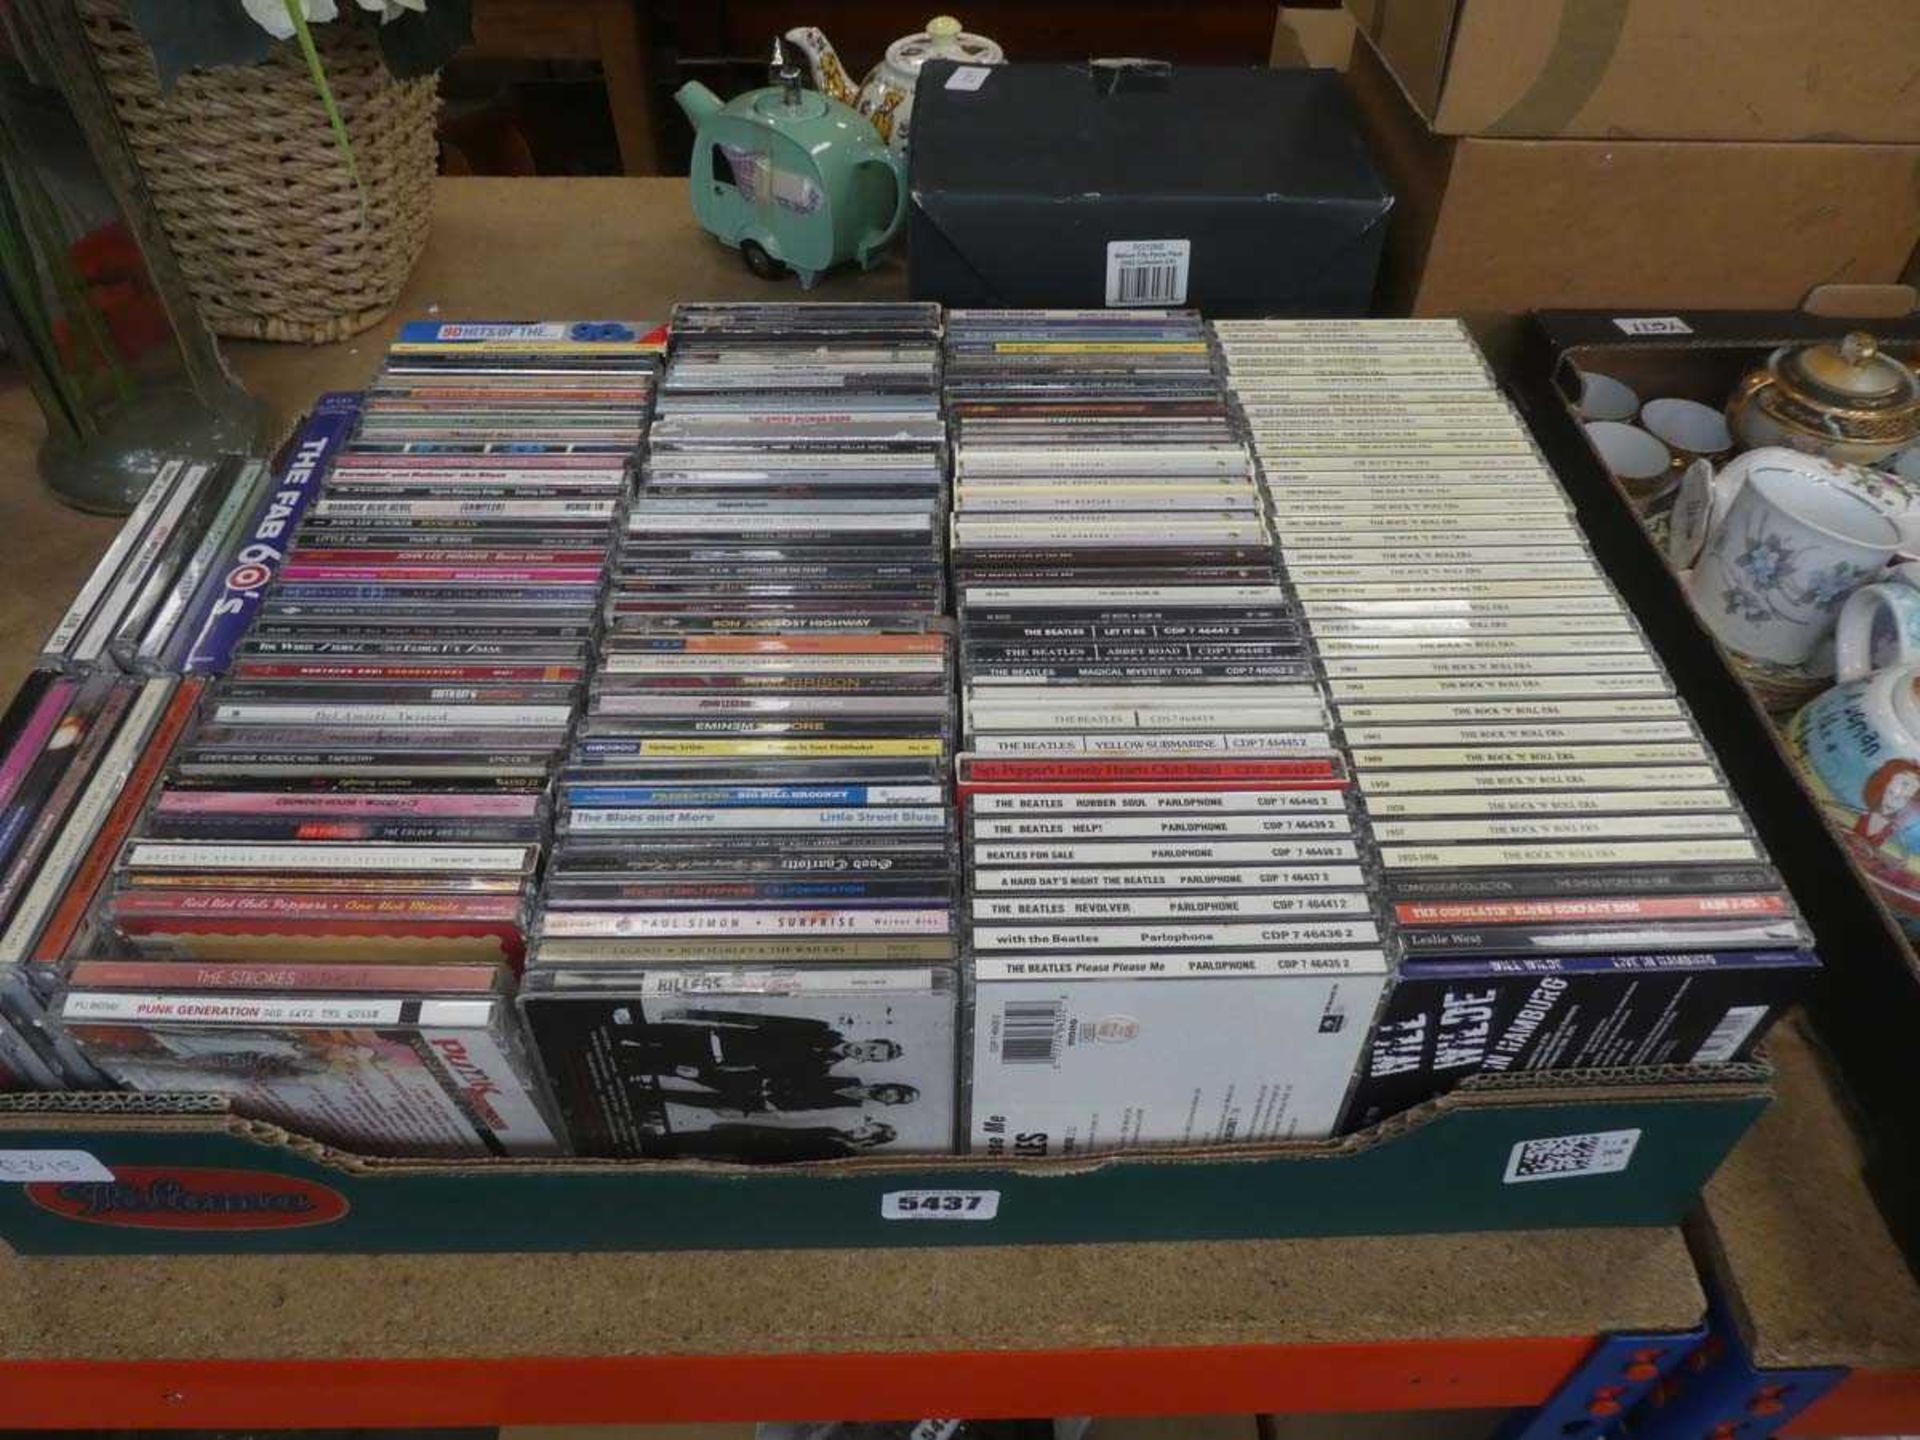 Box containing a collection of CD's